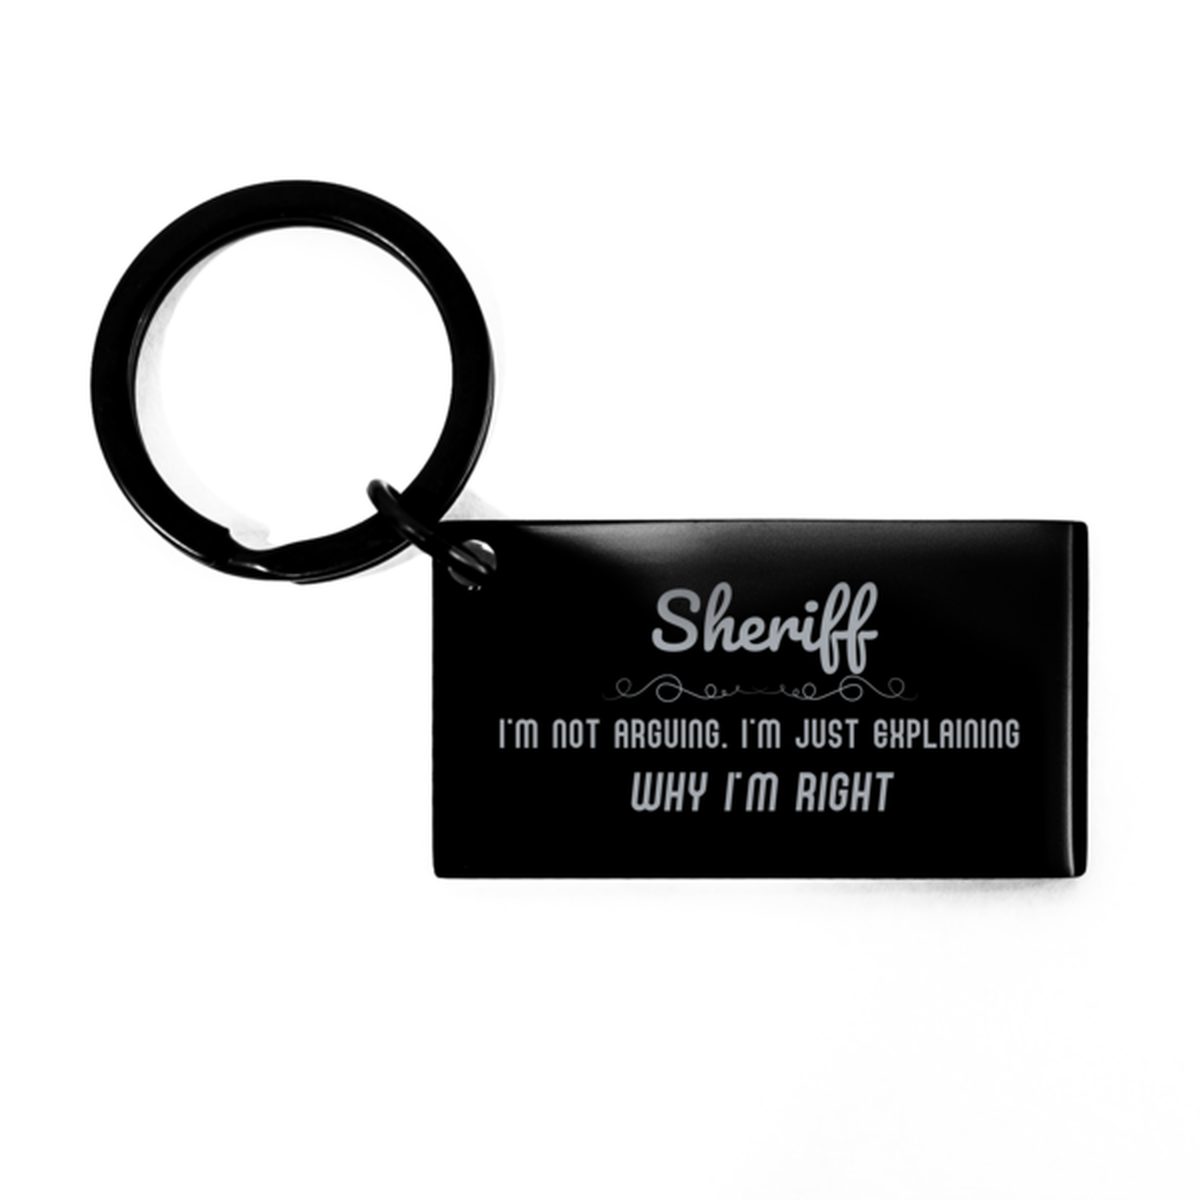 Sheriff I'm not Arguing. I'm Just Explaining Why I'm RIGHT Keychain, Funny Saying Quote Sheriff Gifts For Sheriff Graduation Birthday Christmas Gifts for Men Women Coworker